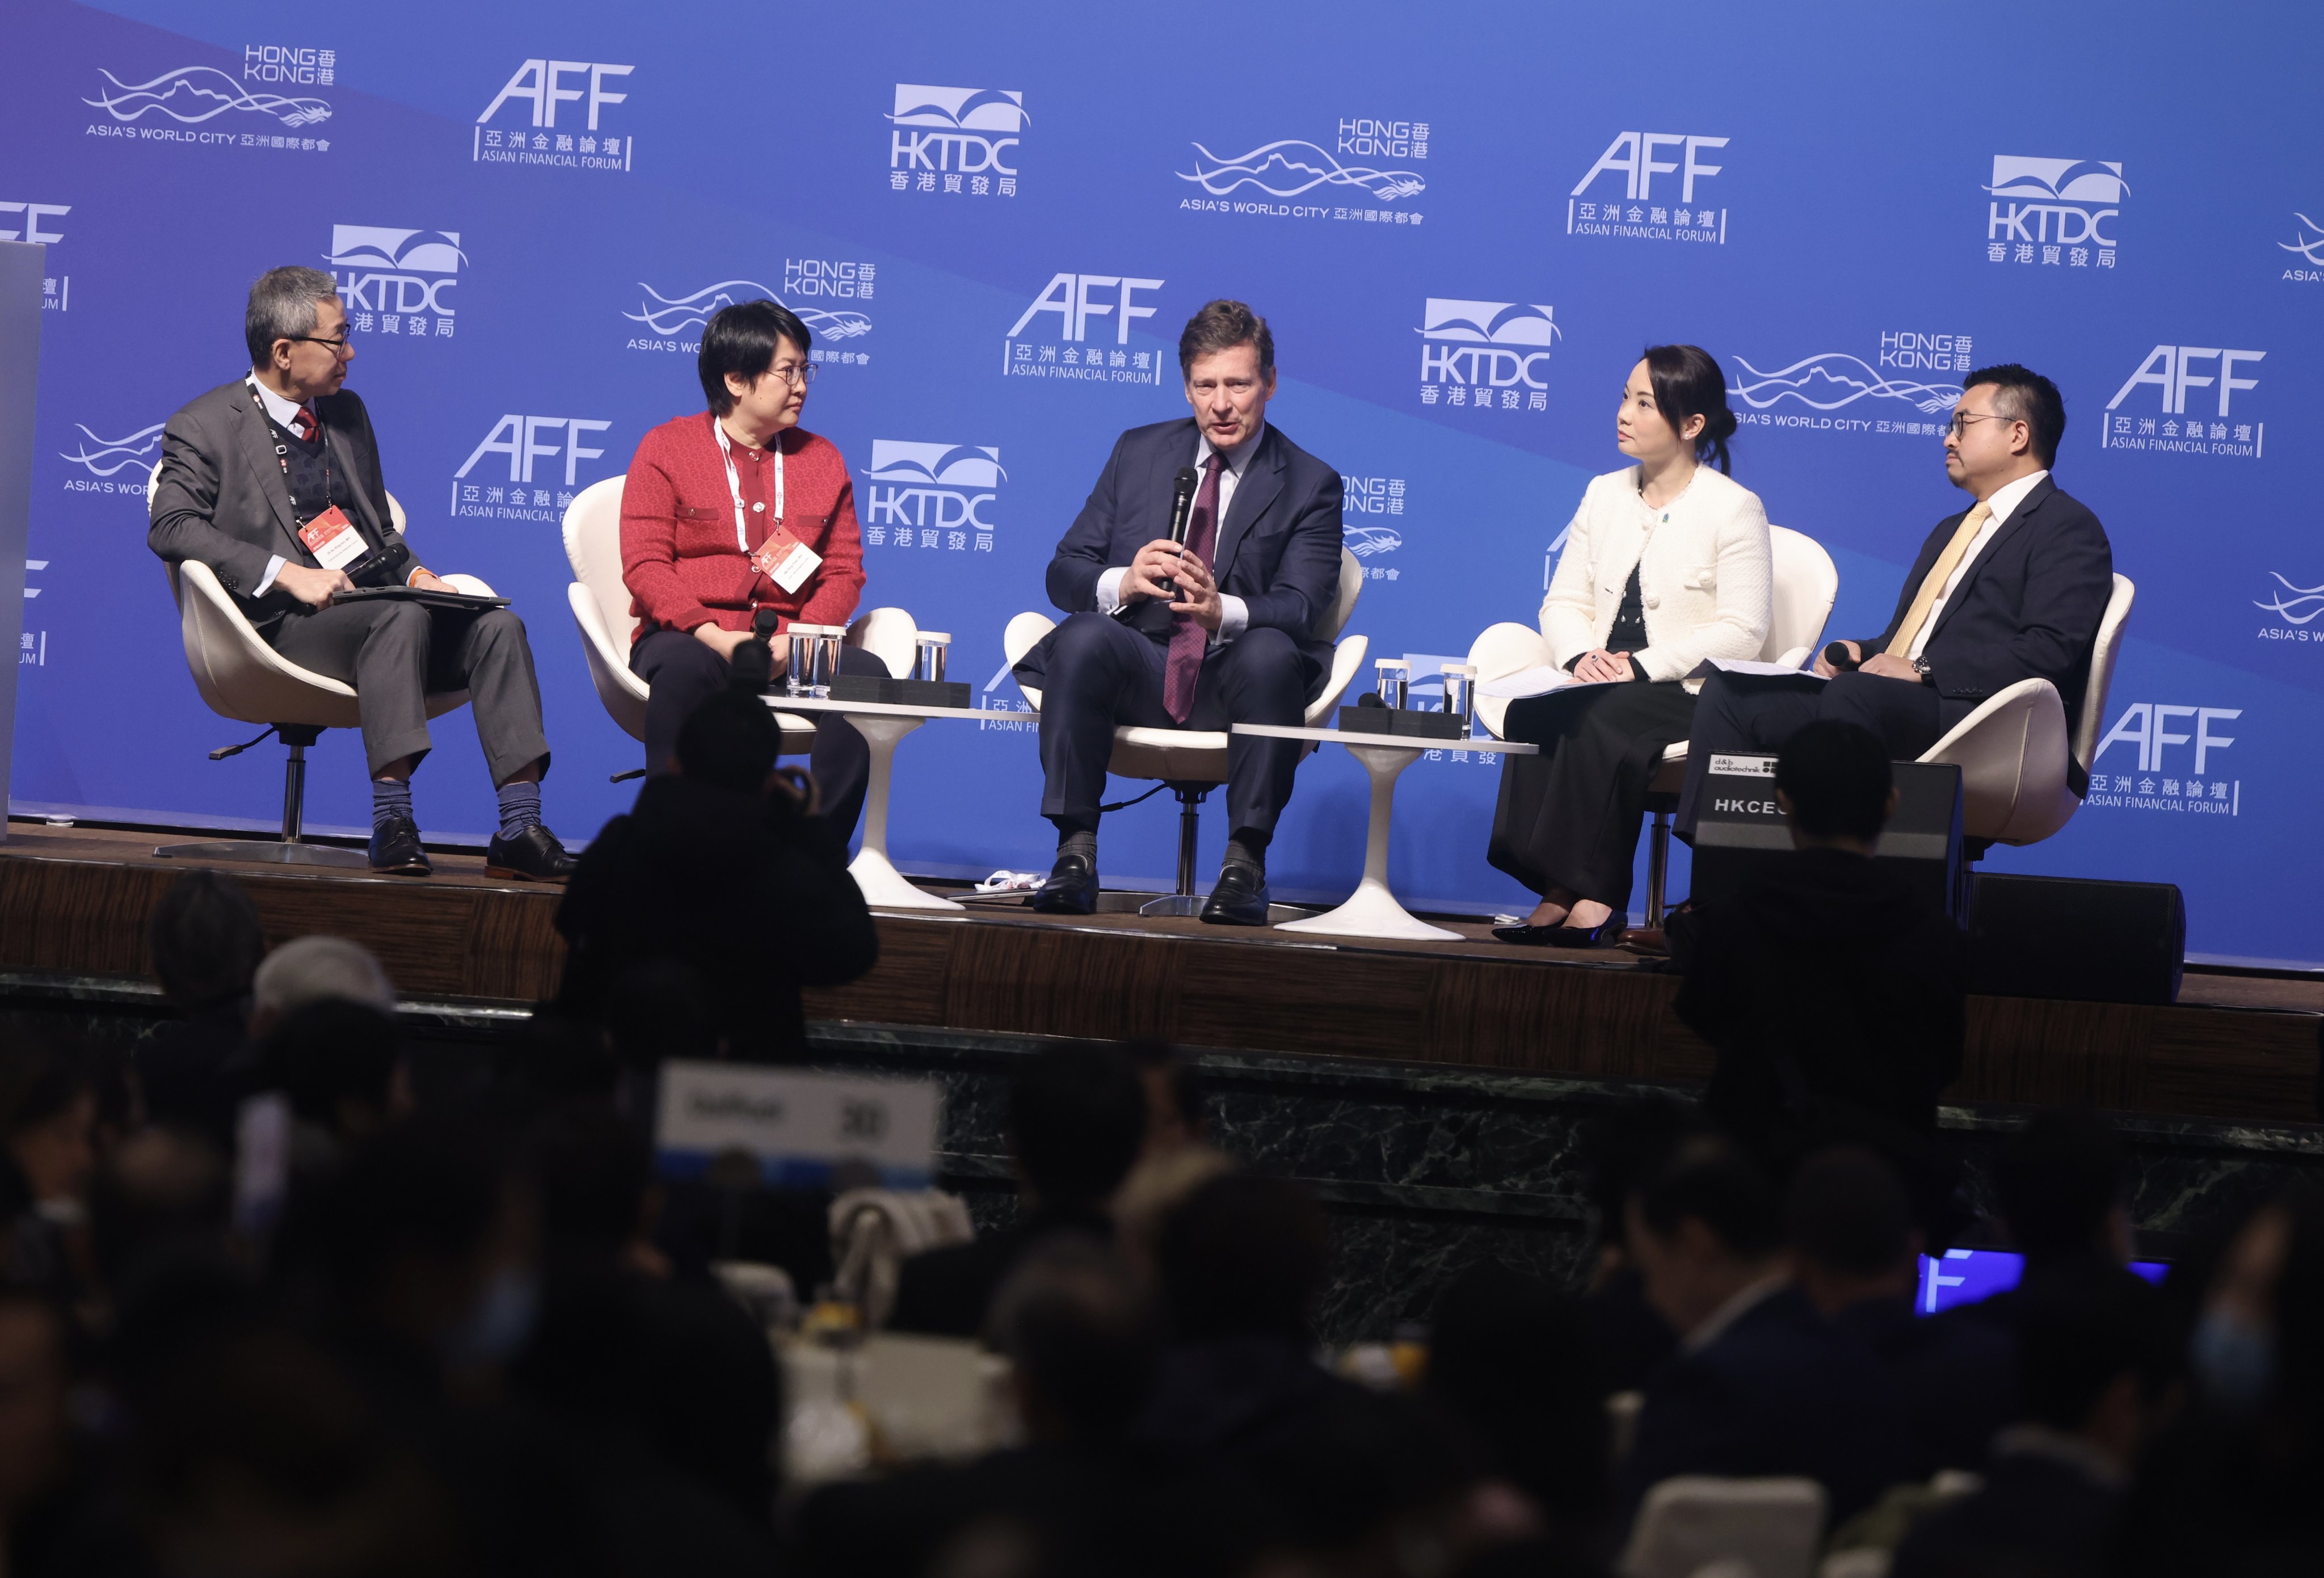 A panel discussion on the renminbi’s global use during the second day of the Asian Financial Forum (AFF) on 25 January 2024, featuring (left to right): Moderator Au King-lu, executive director of the Financial Services Development Council, Ding Chen, CEO of CSOP Asset Management, Nicolas Macket, CEO of Luxembourg for Finance, Karen Ng, managing director, China opening and RMB internationalisation of Standard Chartered, and Edward Lau Fu-keung, chief financial officer of New World Development. Photo: Jonathan Wong